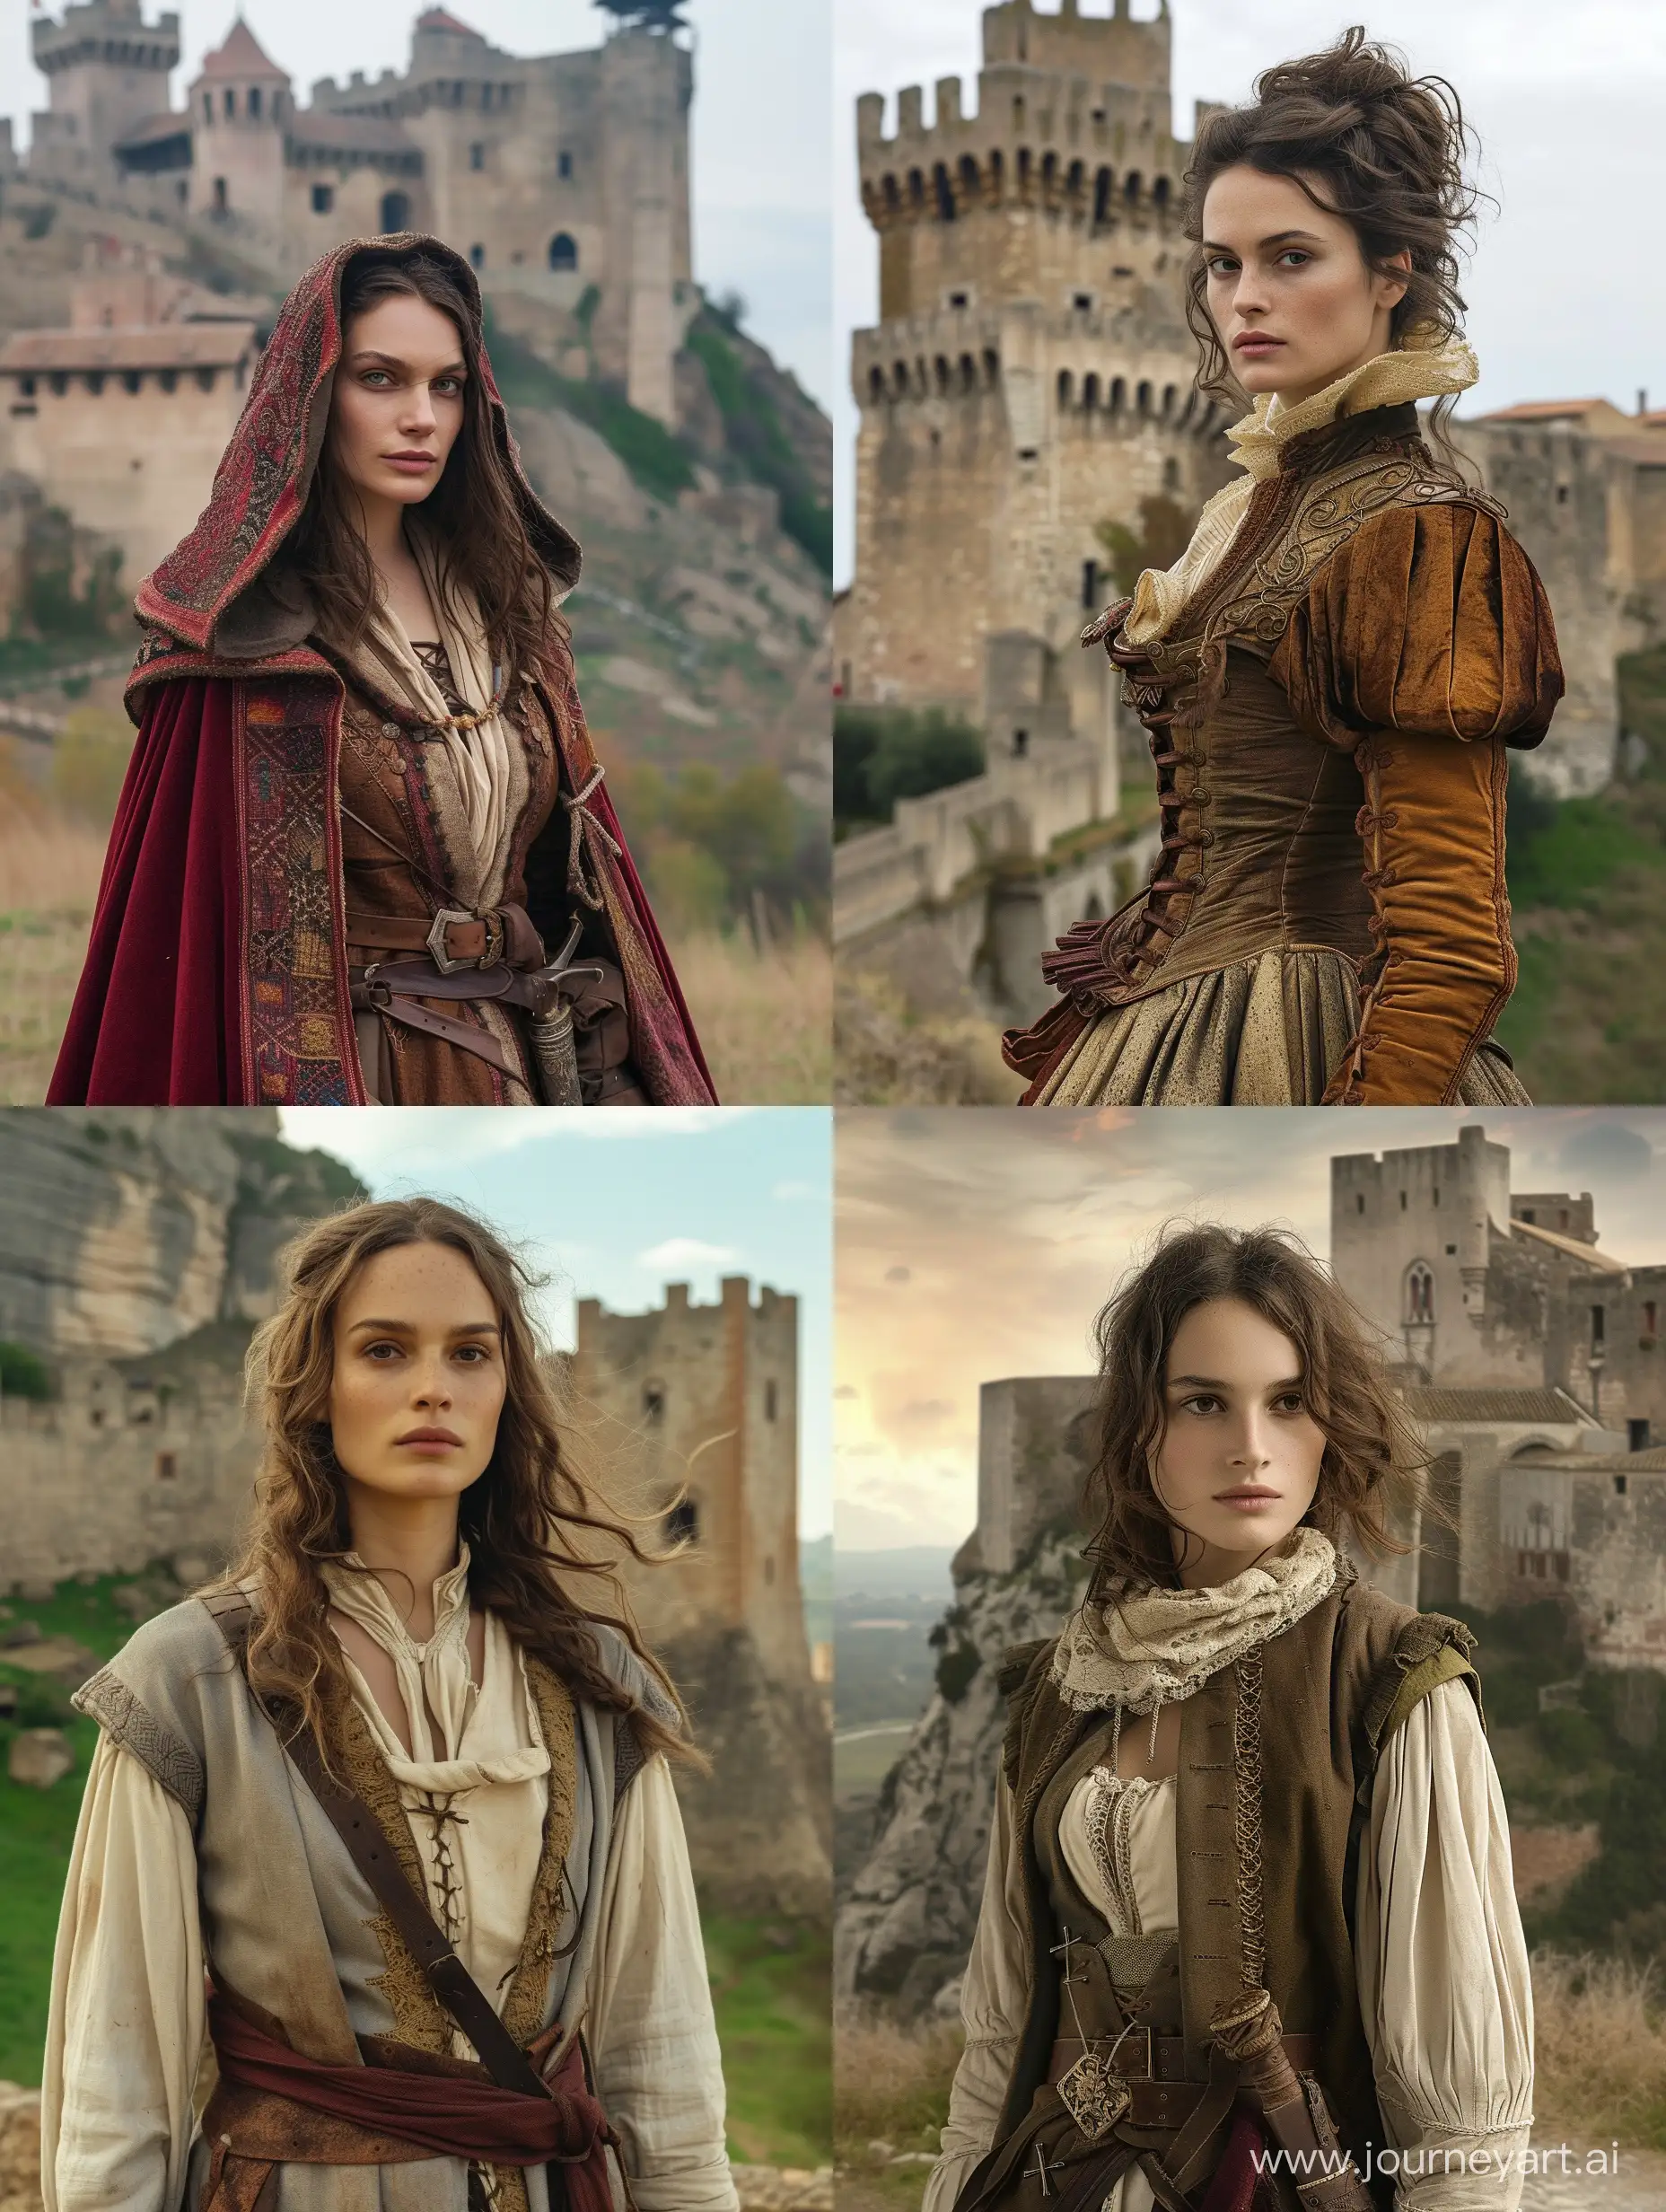 Medieval-Inspired-Fashion-Keira-Knightley-Lookalike-at-Fortress